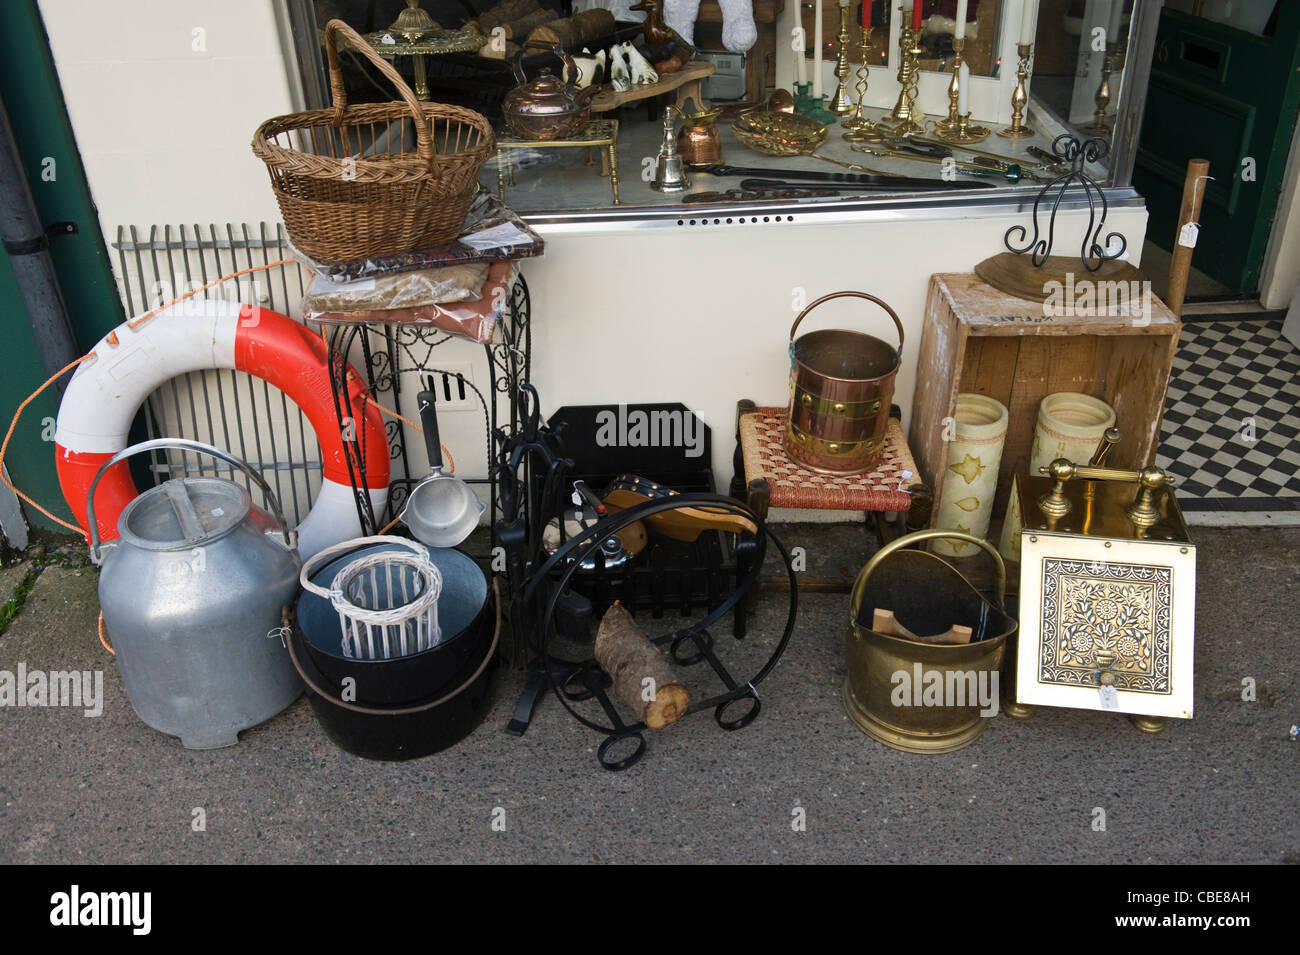 Display of goods outside bric a brac shop on high street in Kington Herefordshire England UK Stock Photo